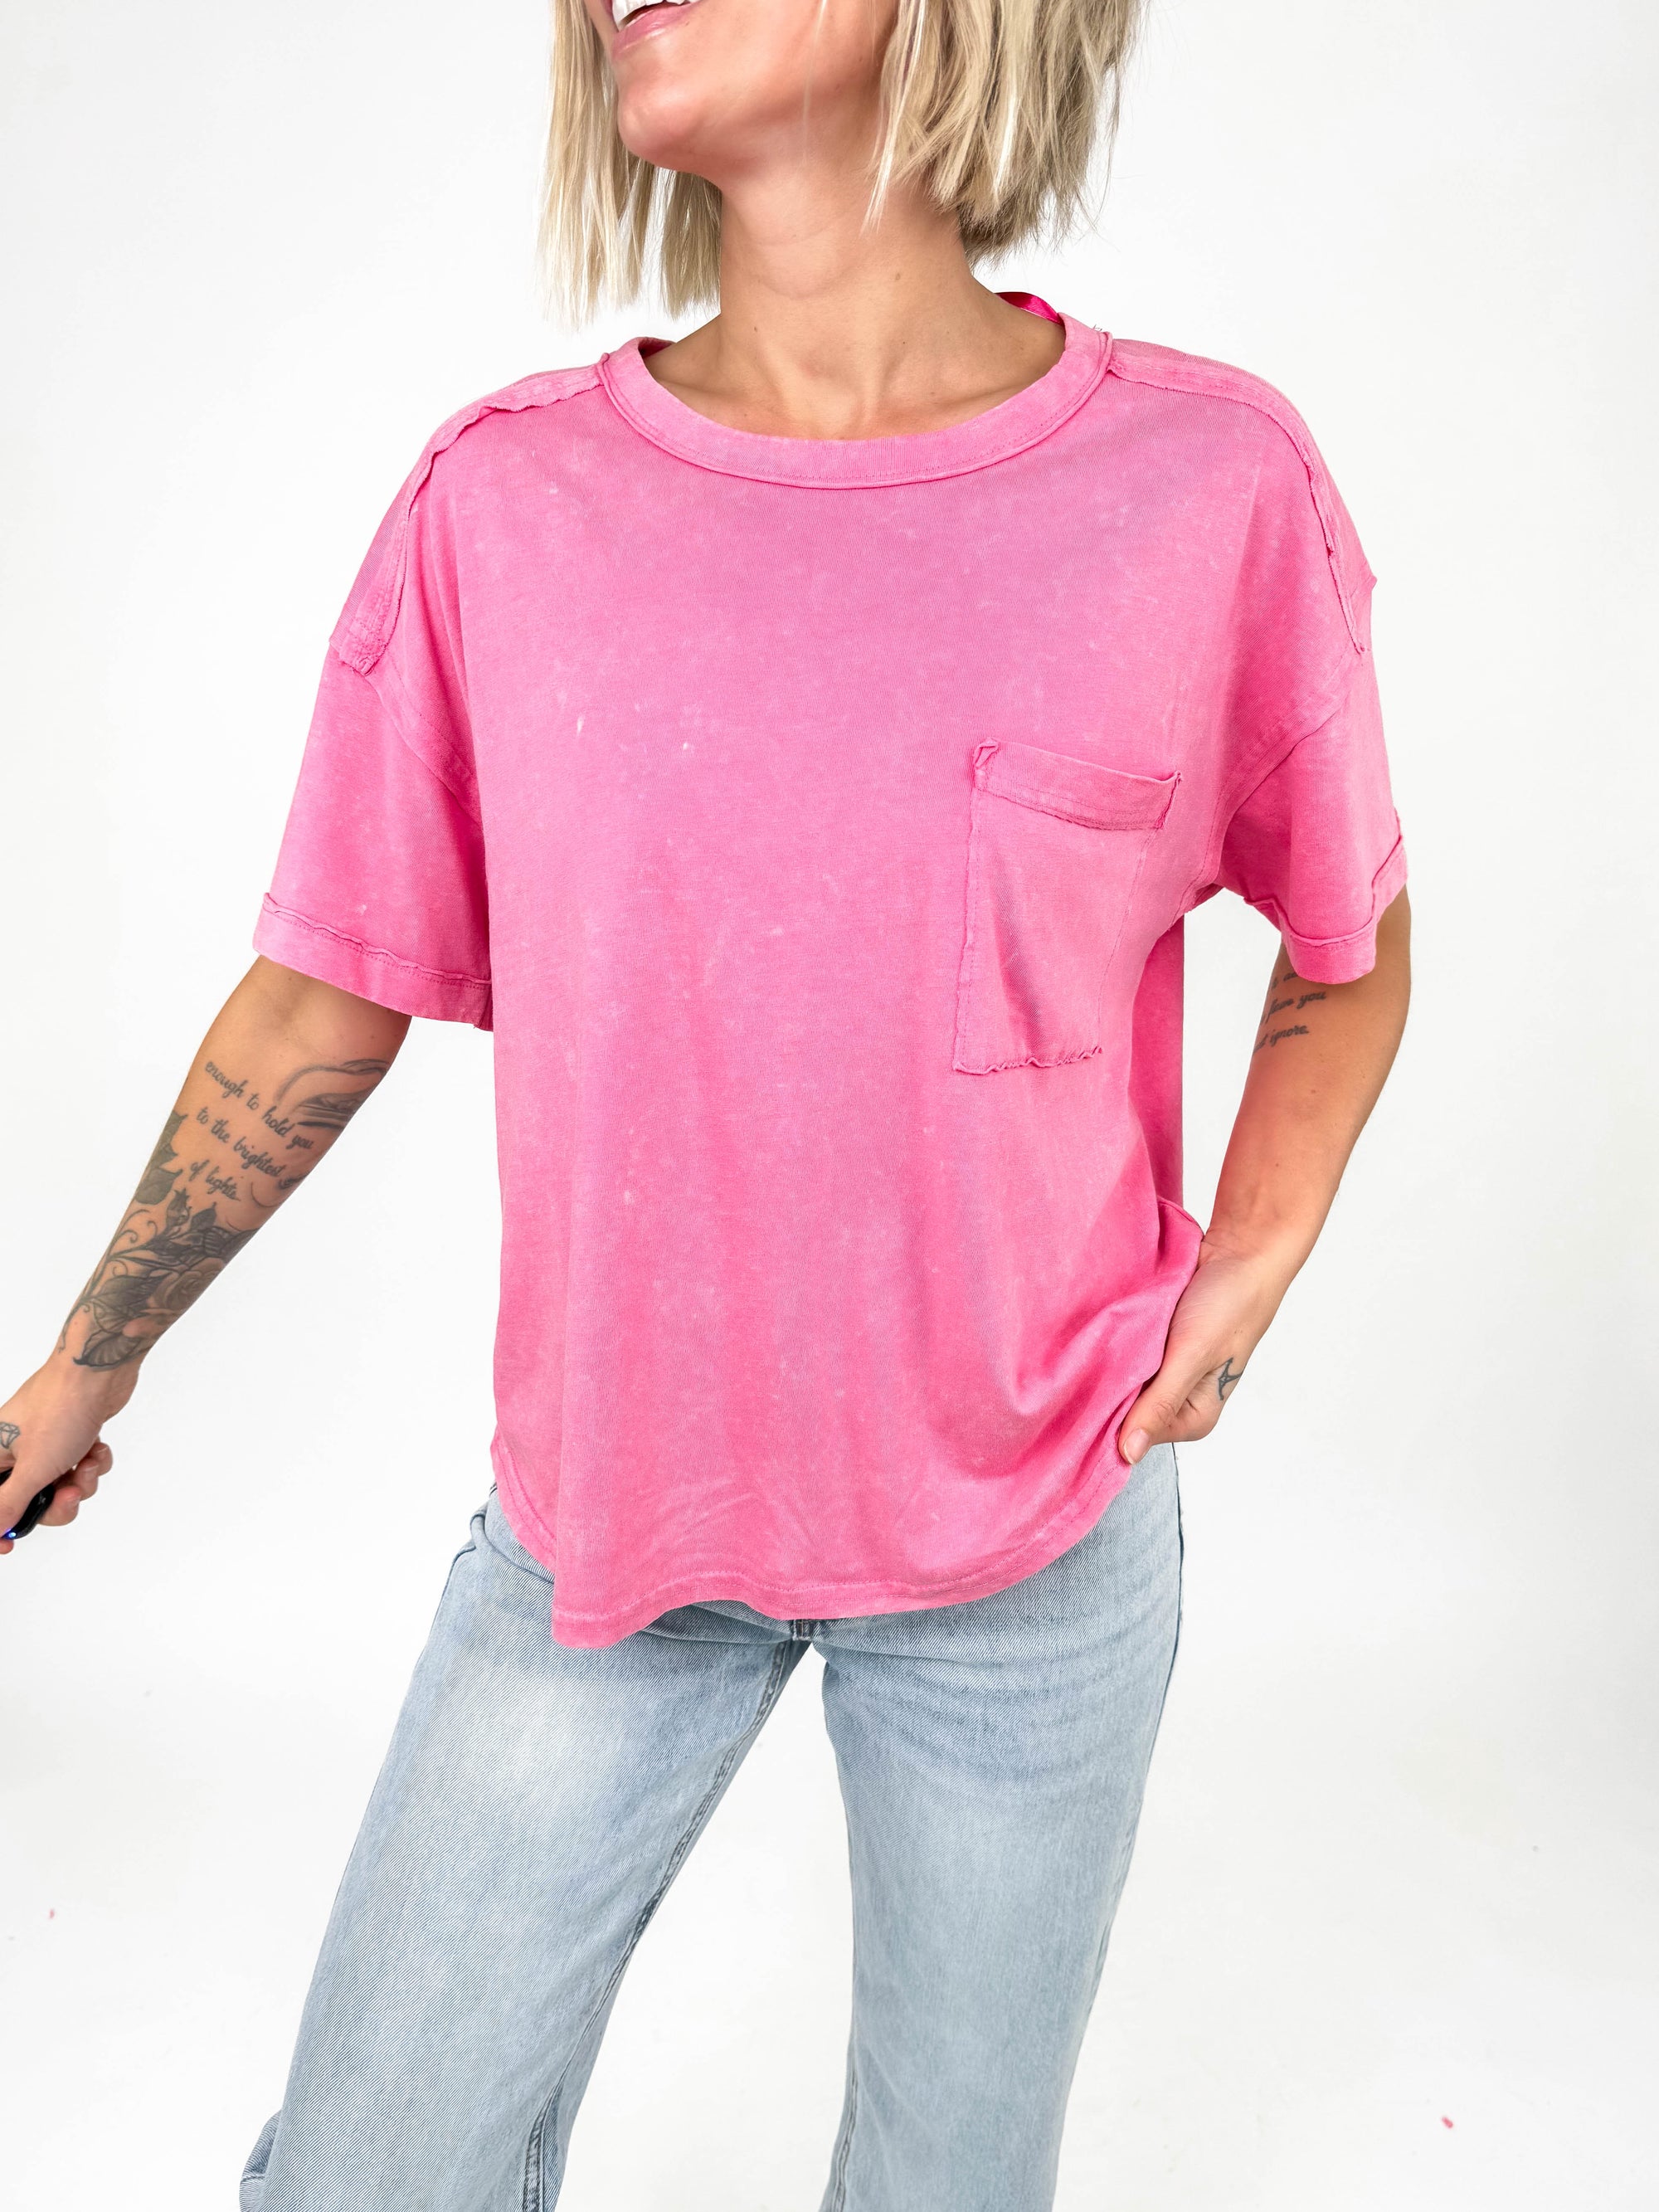 South Beach Washed Pocket Tee- PINK-FINAL SALE